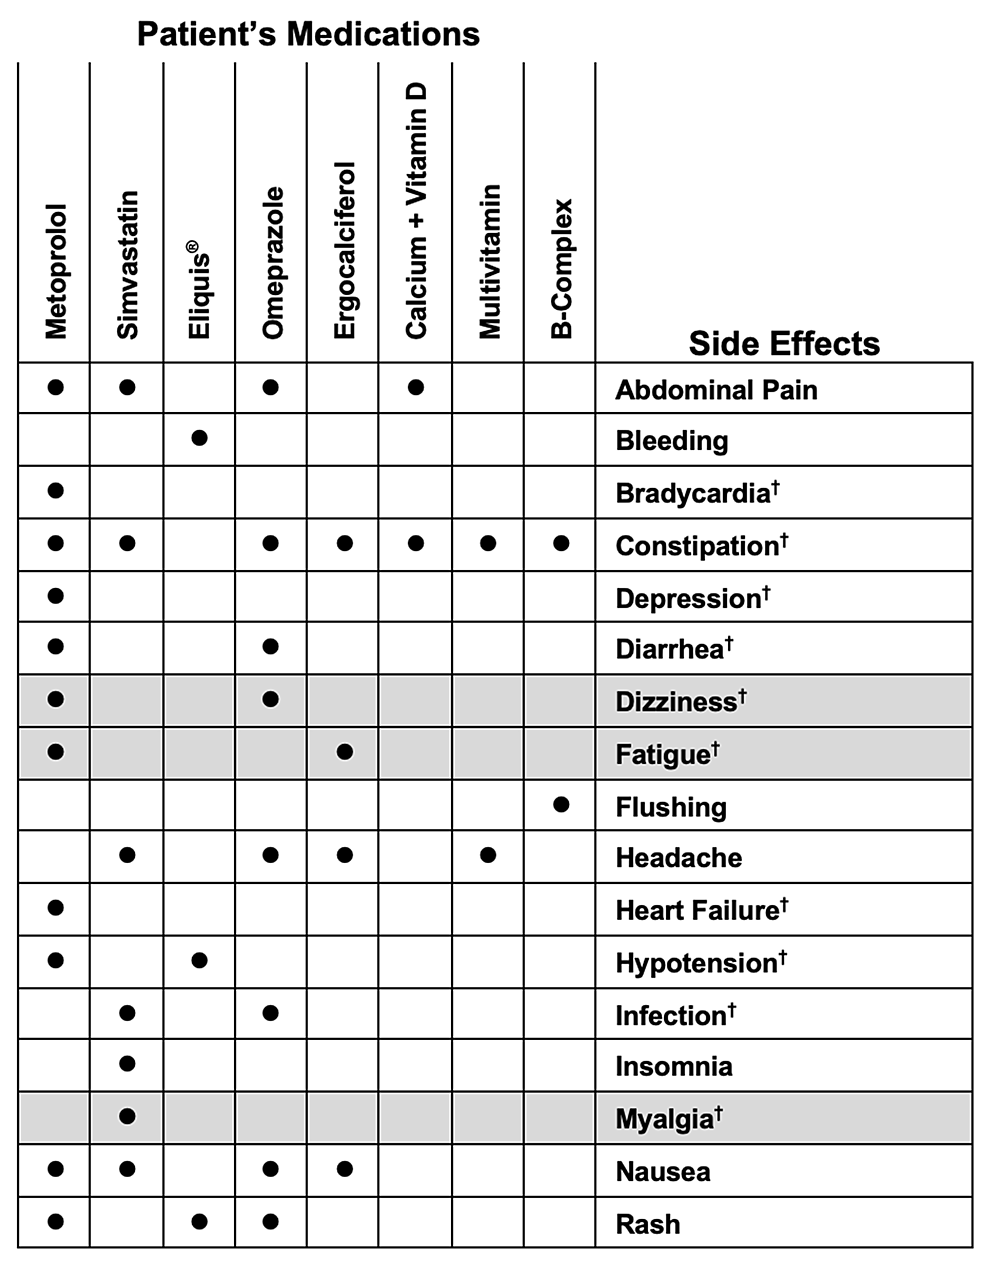 Patient-medication-list-and-commonly-reported-side-effects